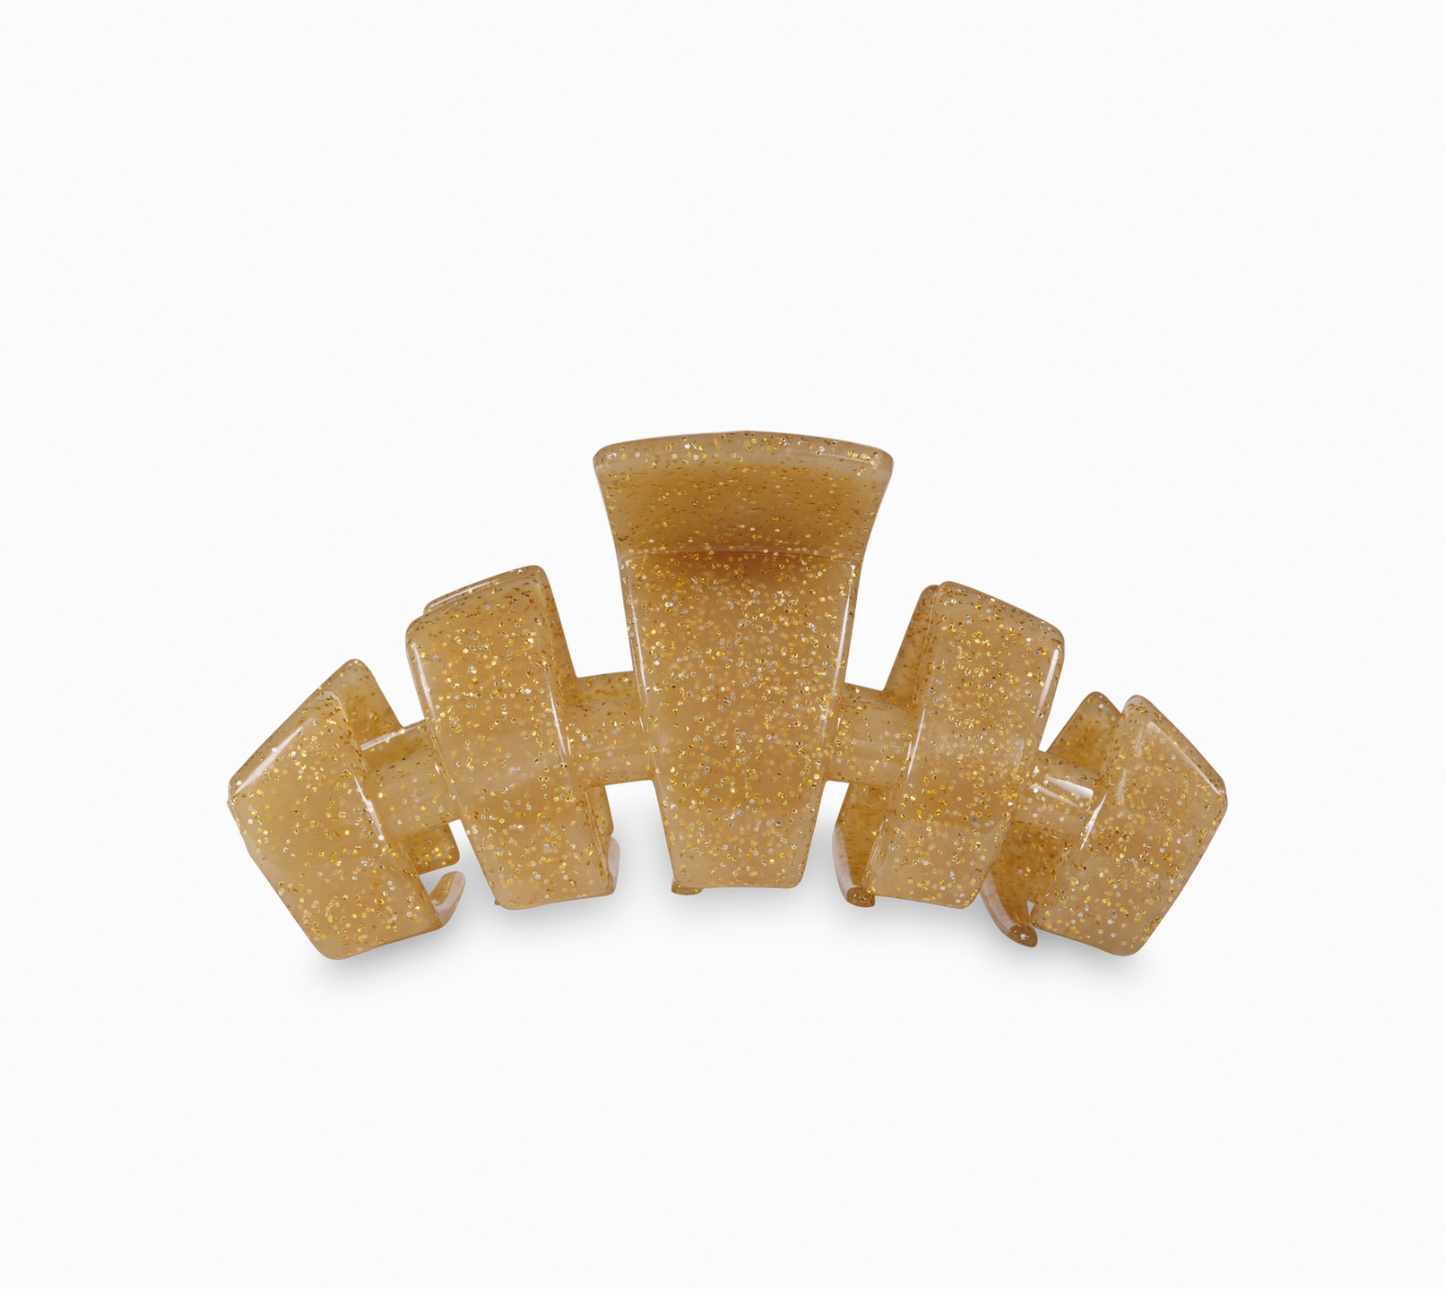 Teleties Claw Clips (various sizes)